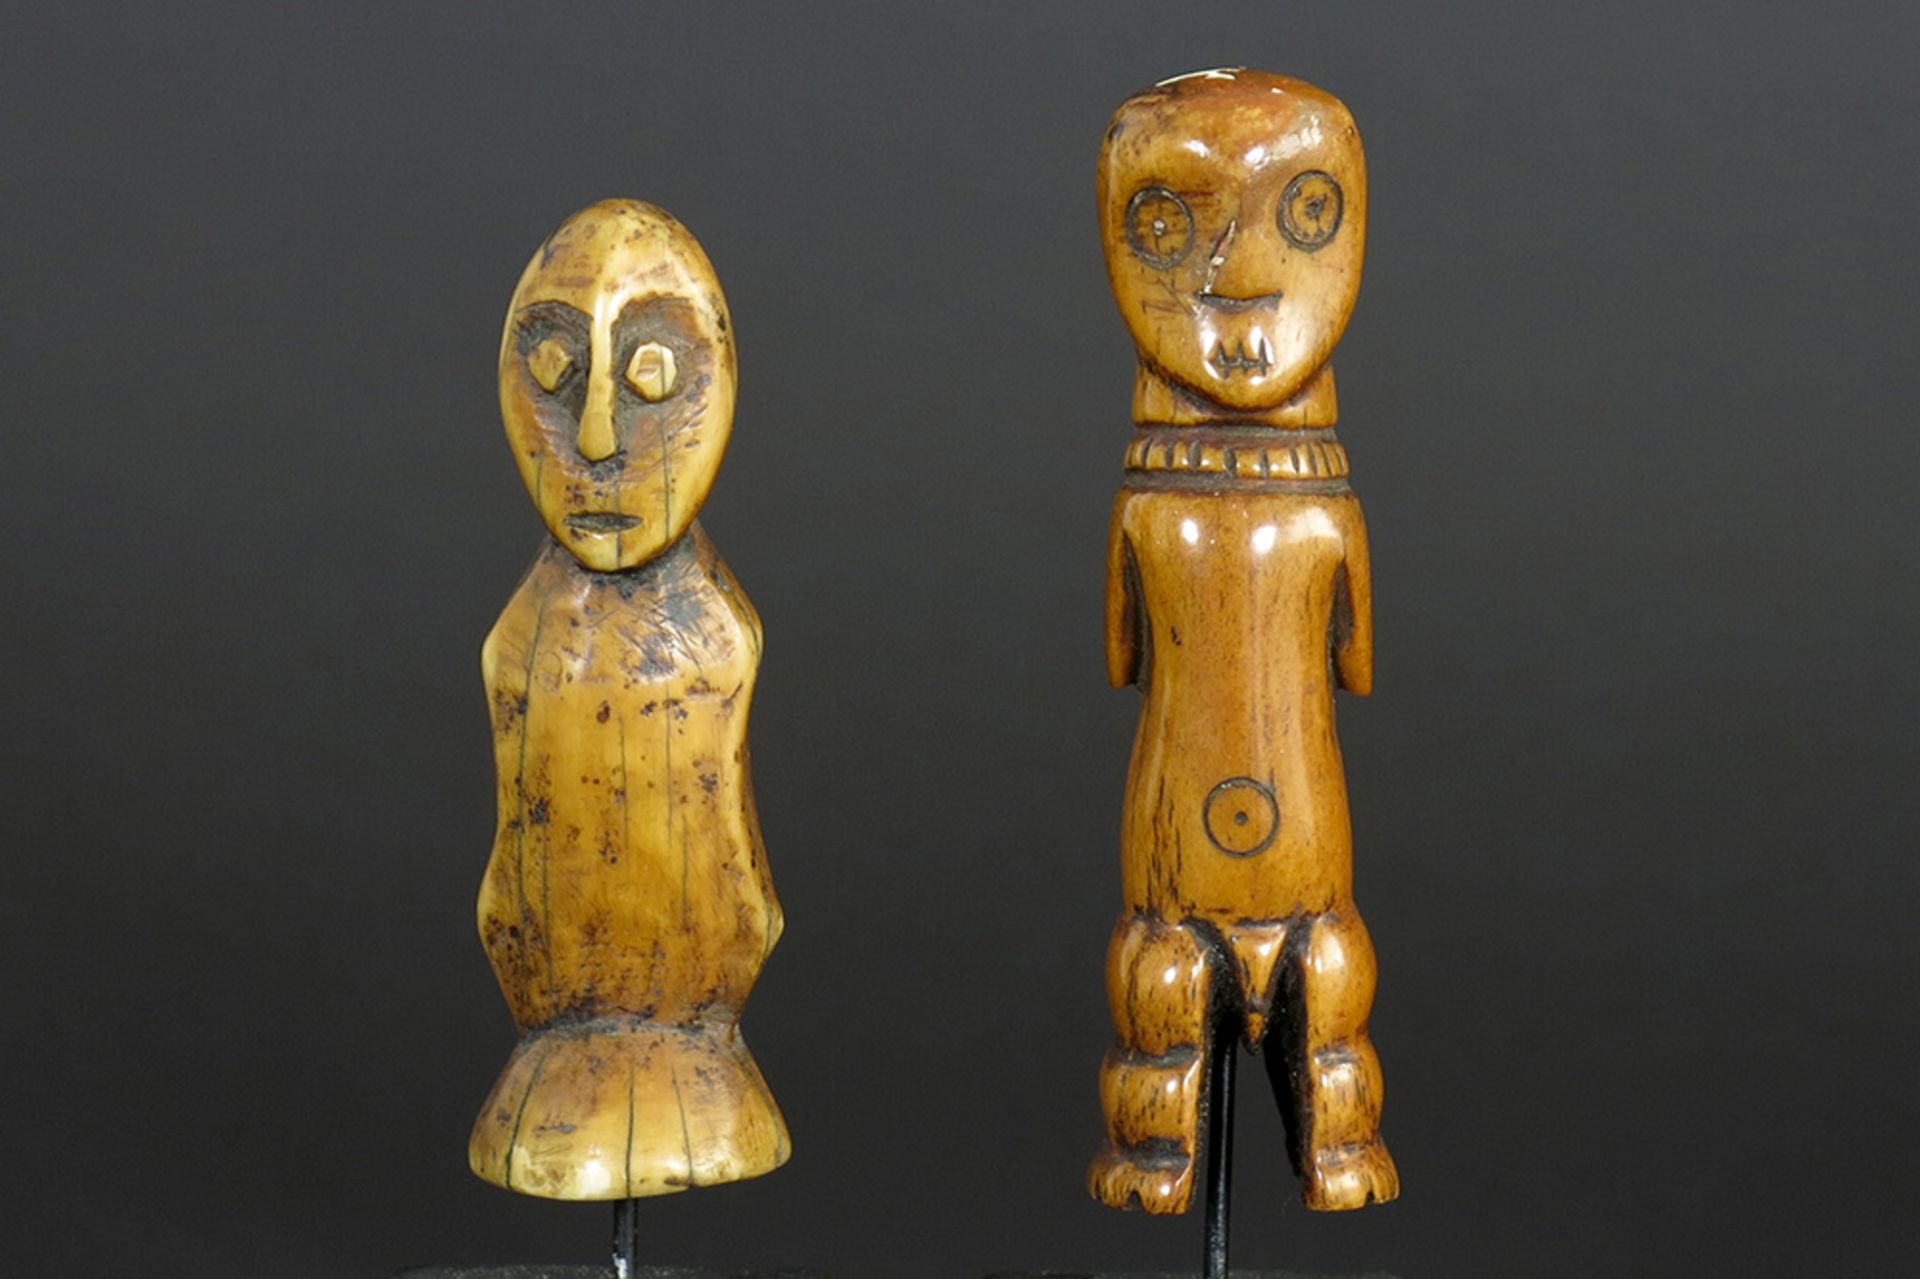 two African Congolese 'Lega' human figure sculptures in ivory with nice patina - one is the head